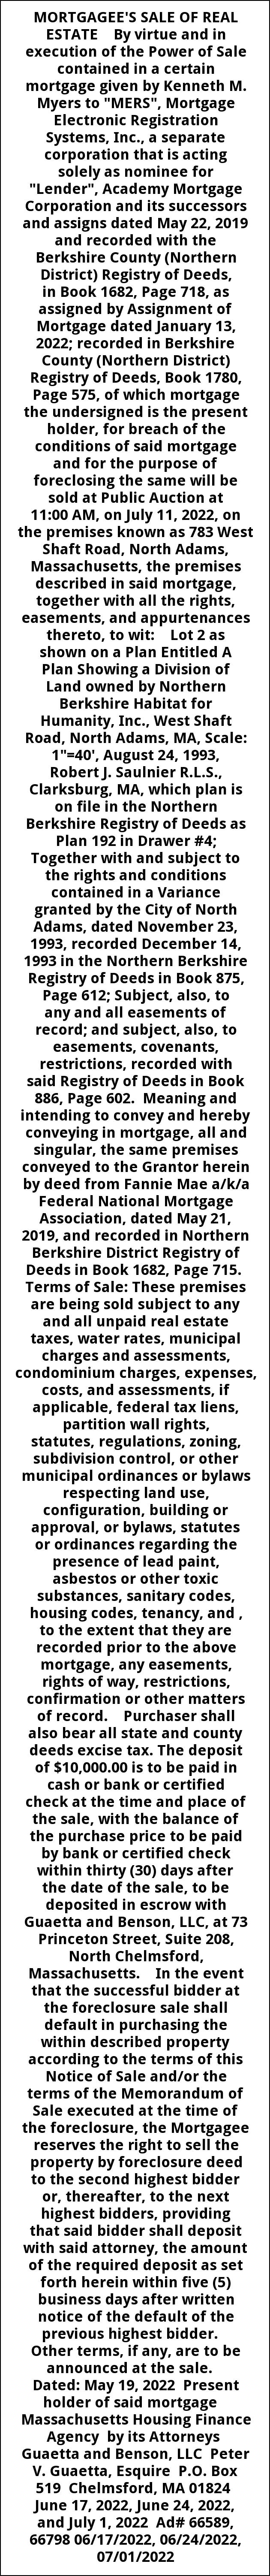 Mortgagee's Sale Of Real Estate